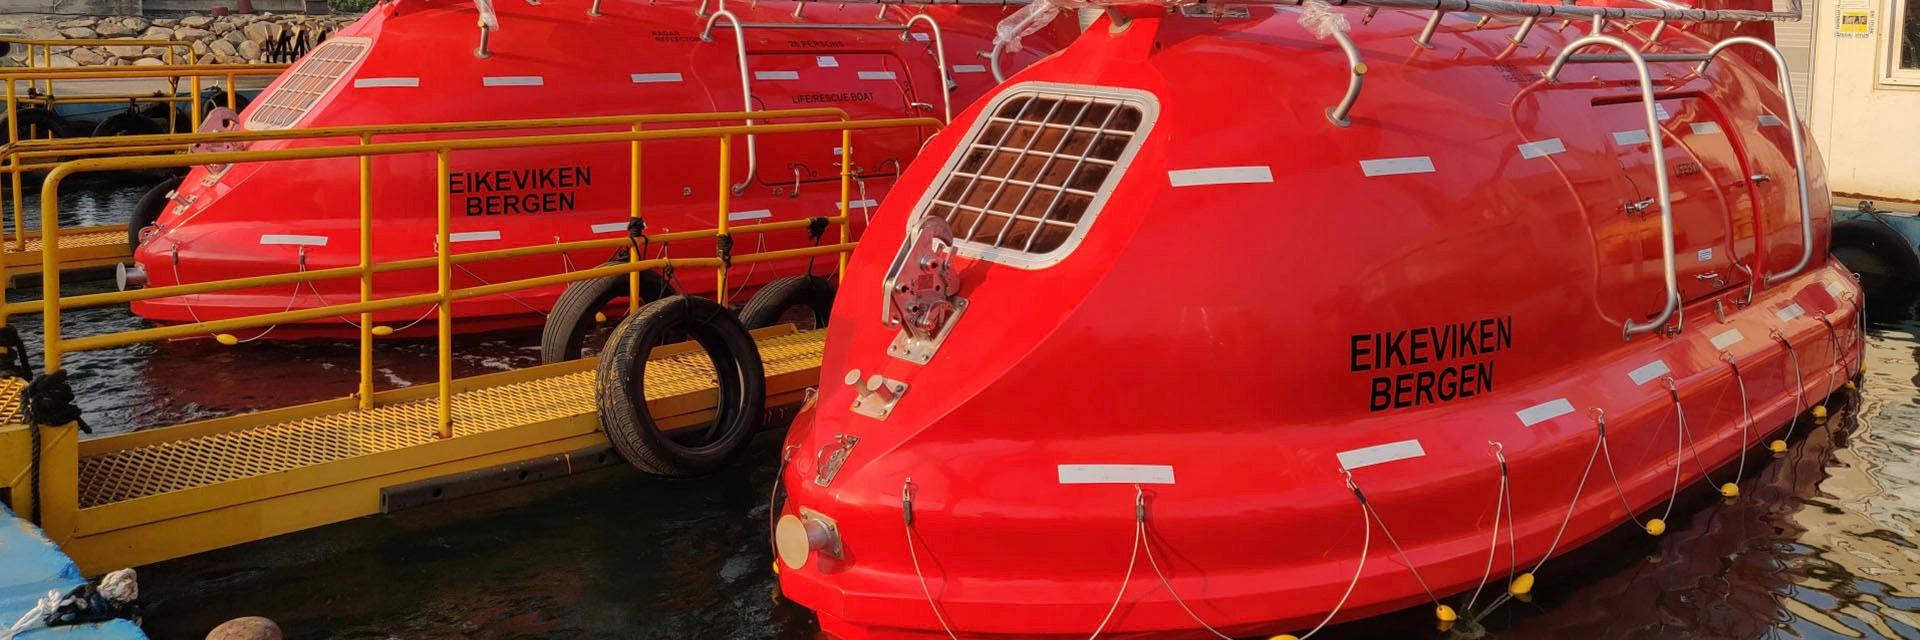 Two red lifeboats docked